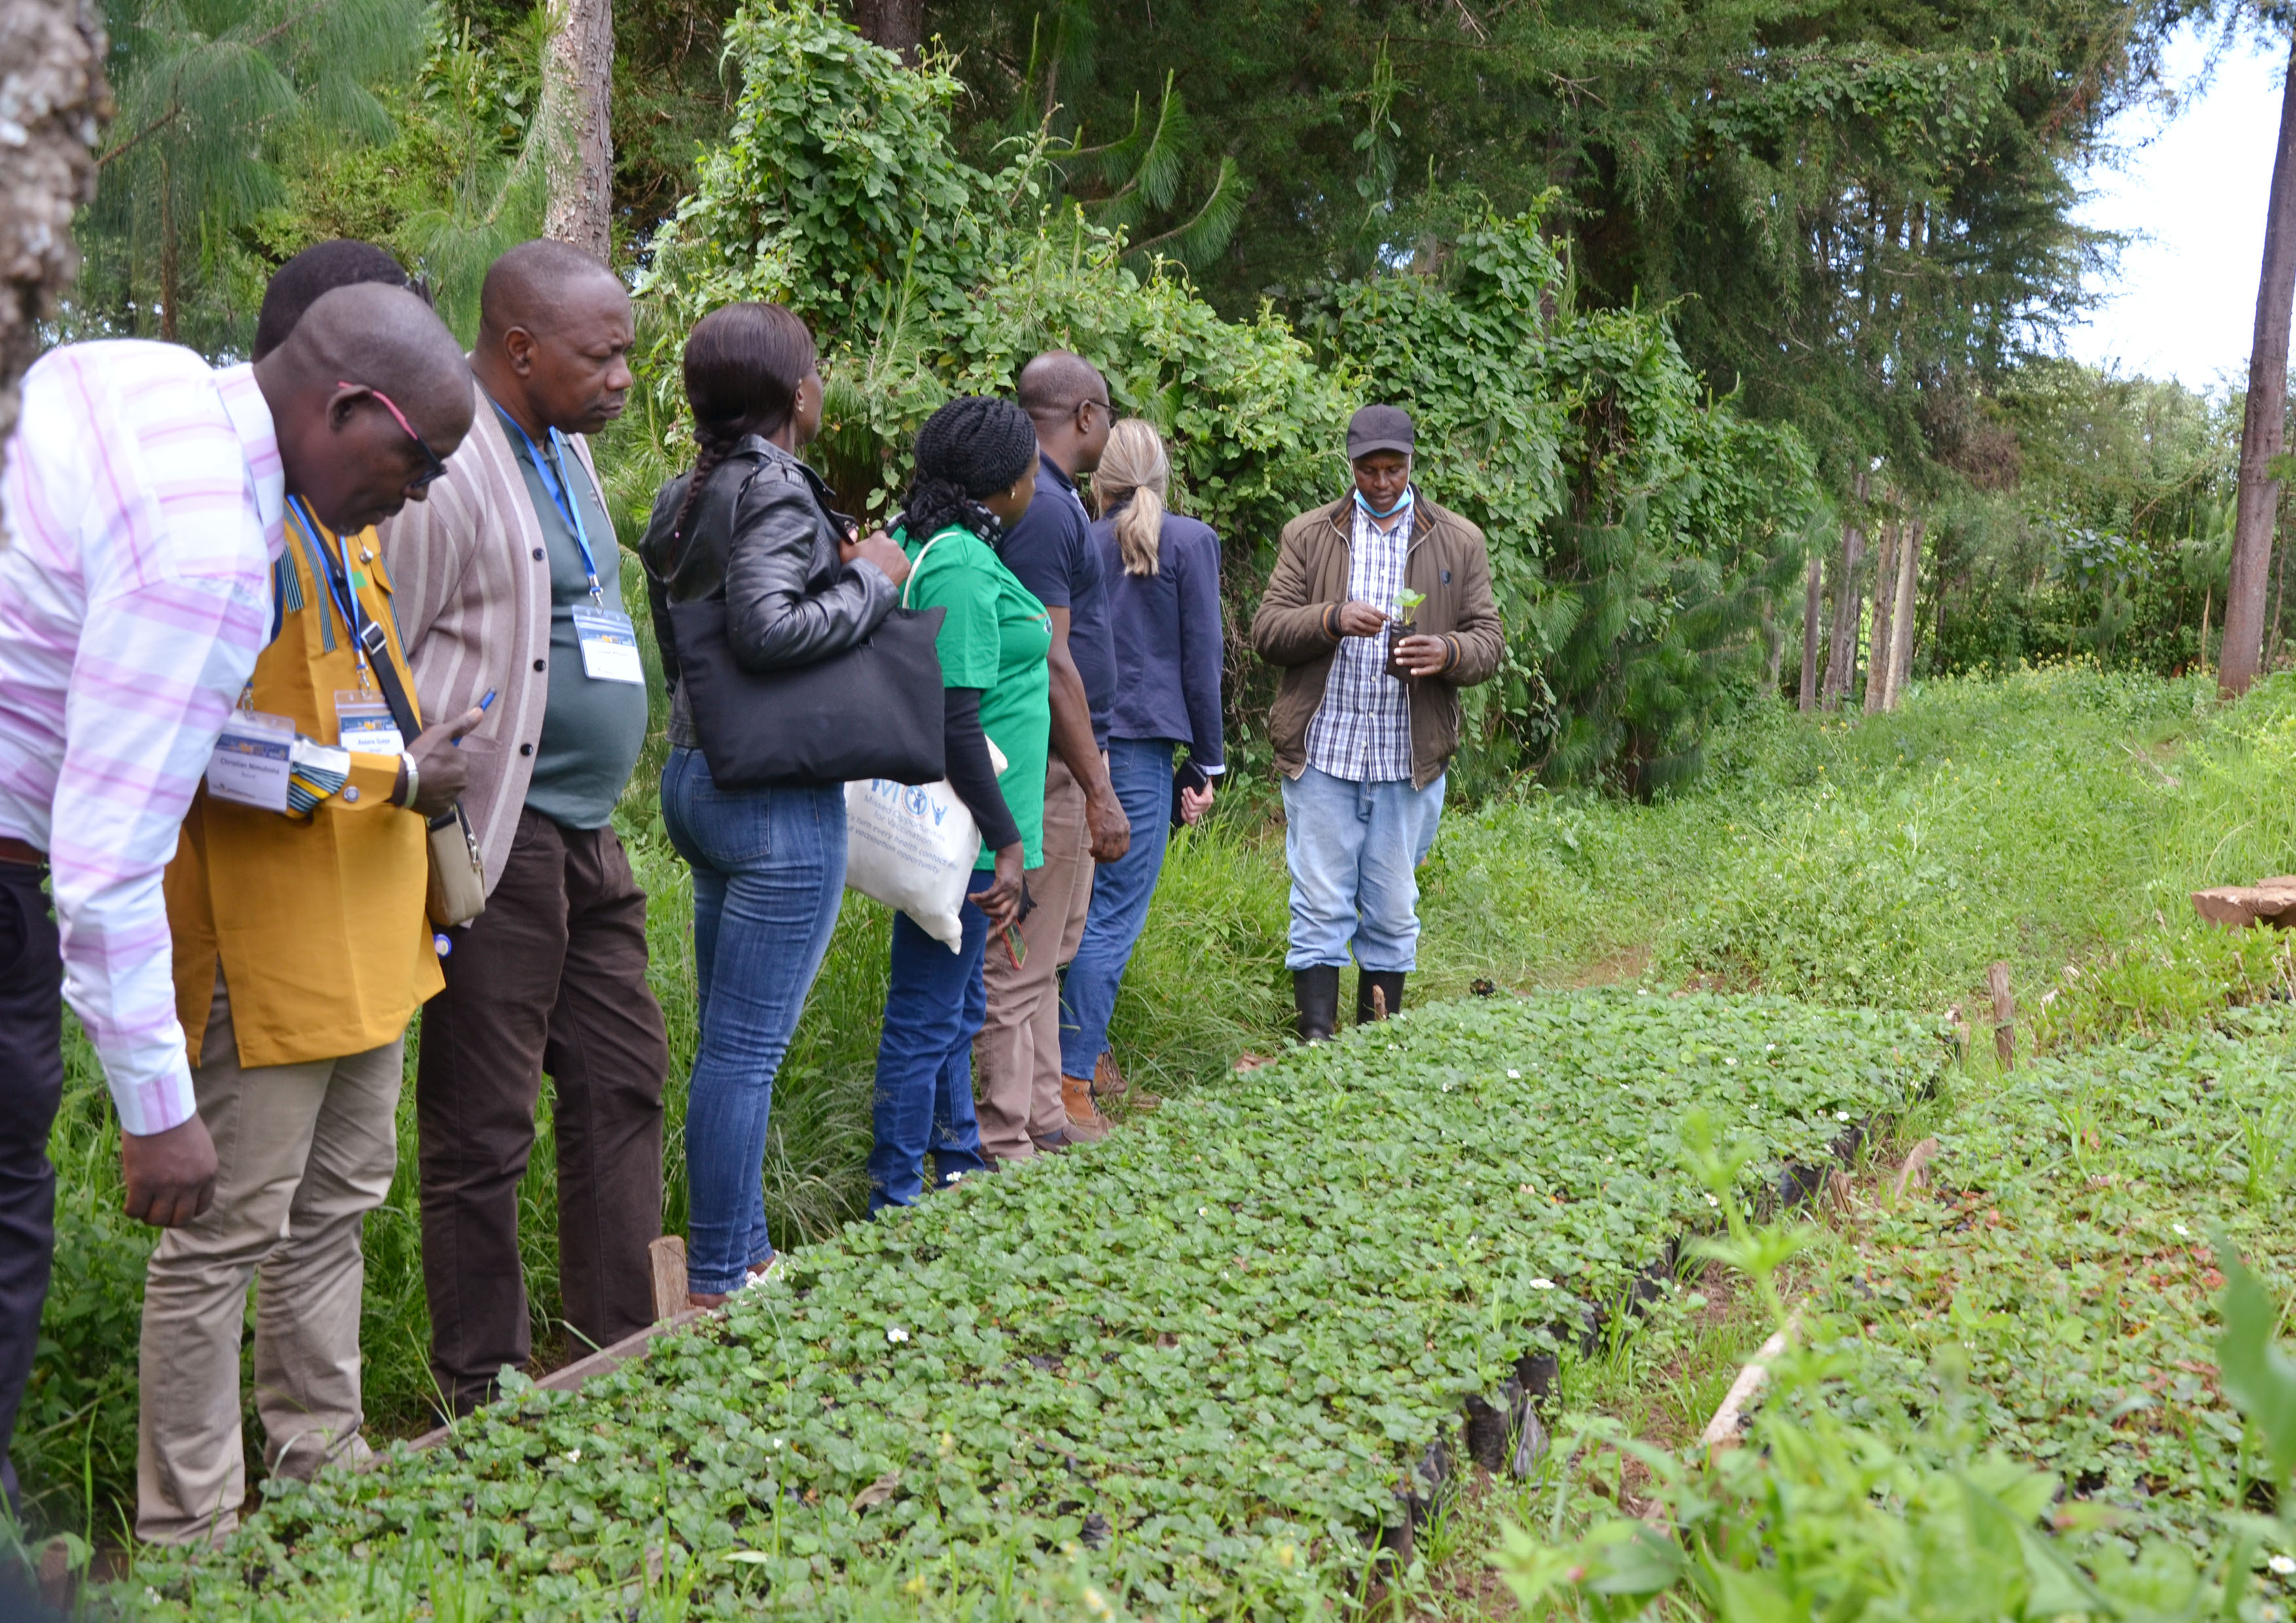 Visiting Peter Kamau’s strawberry farm. Thanks to the UTNWF contribution to capture water runoff in a reservoir on his farm, Peter has scaled his strawberry production from 0.5 acres to 2 acres and is now employing people to help on his farm. (Credit: ICRAF)